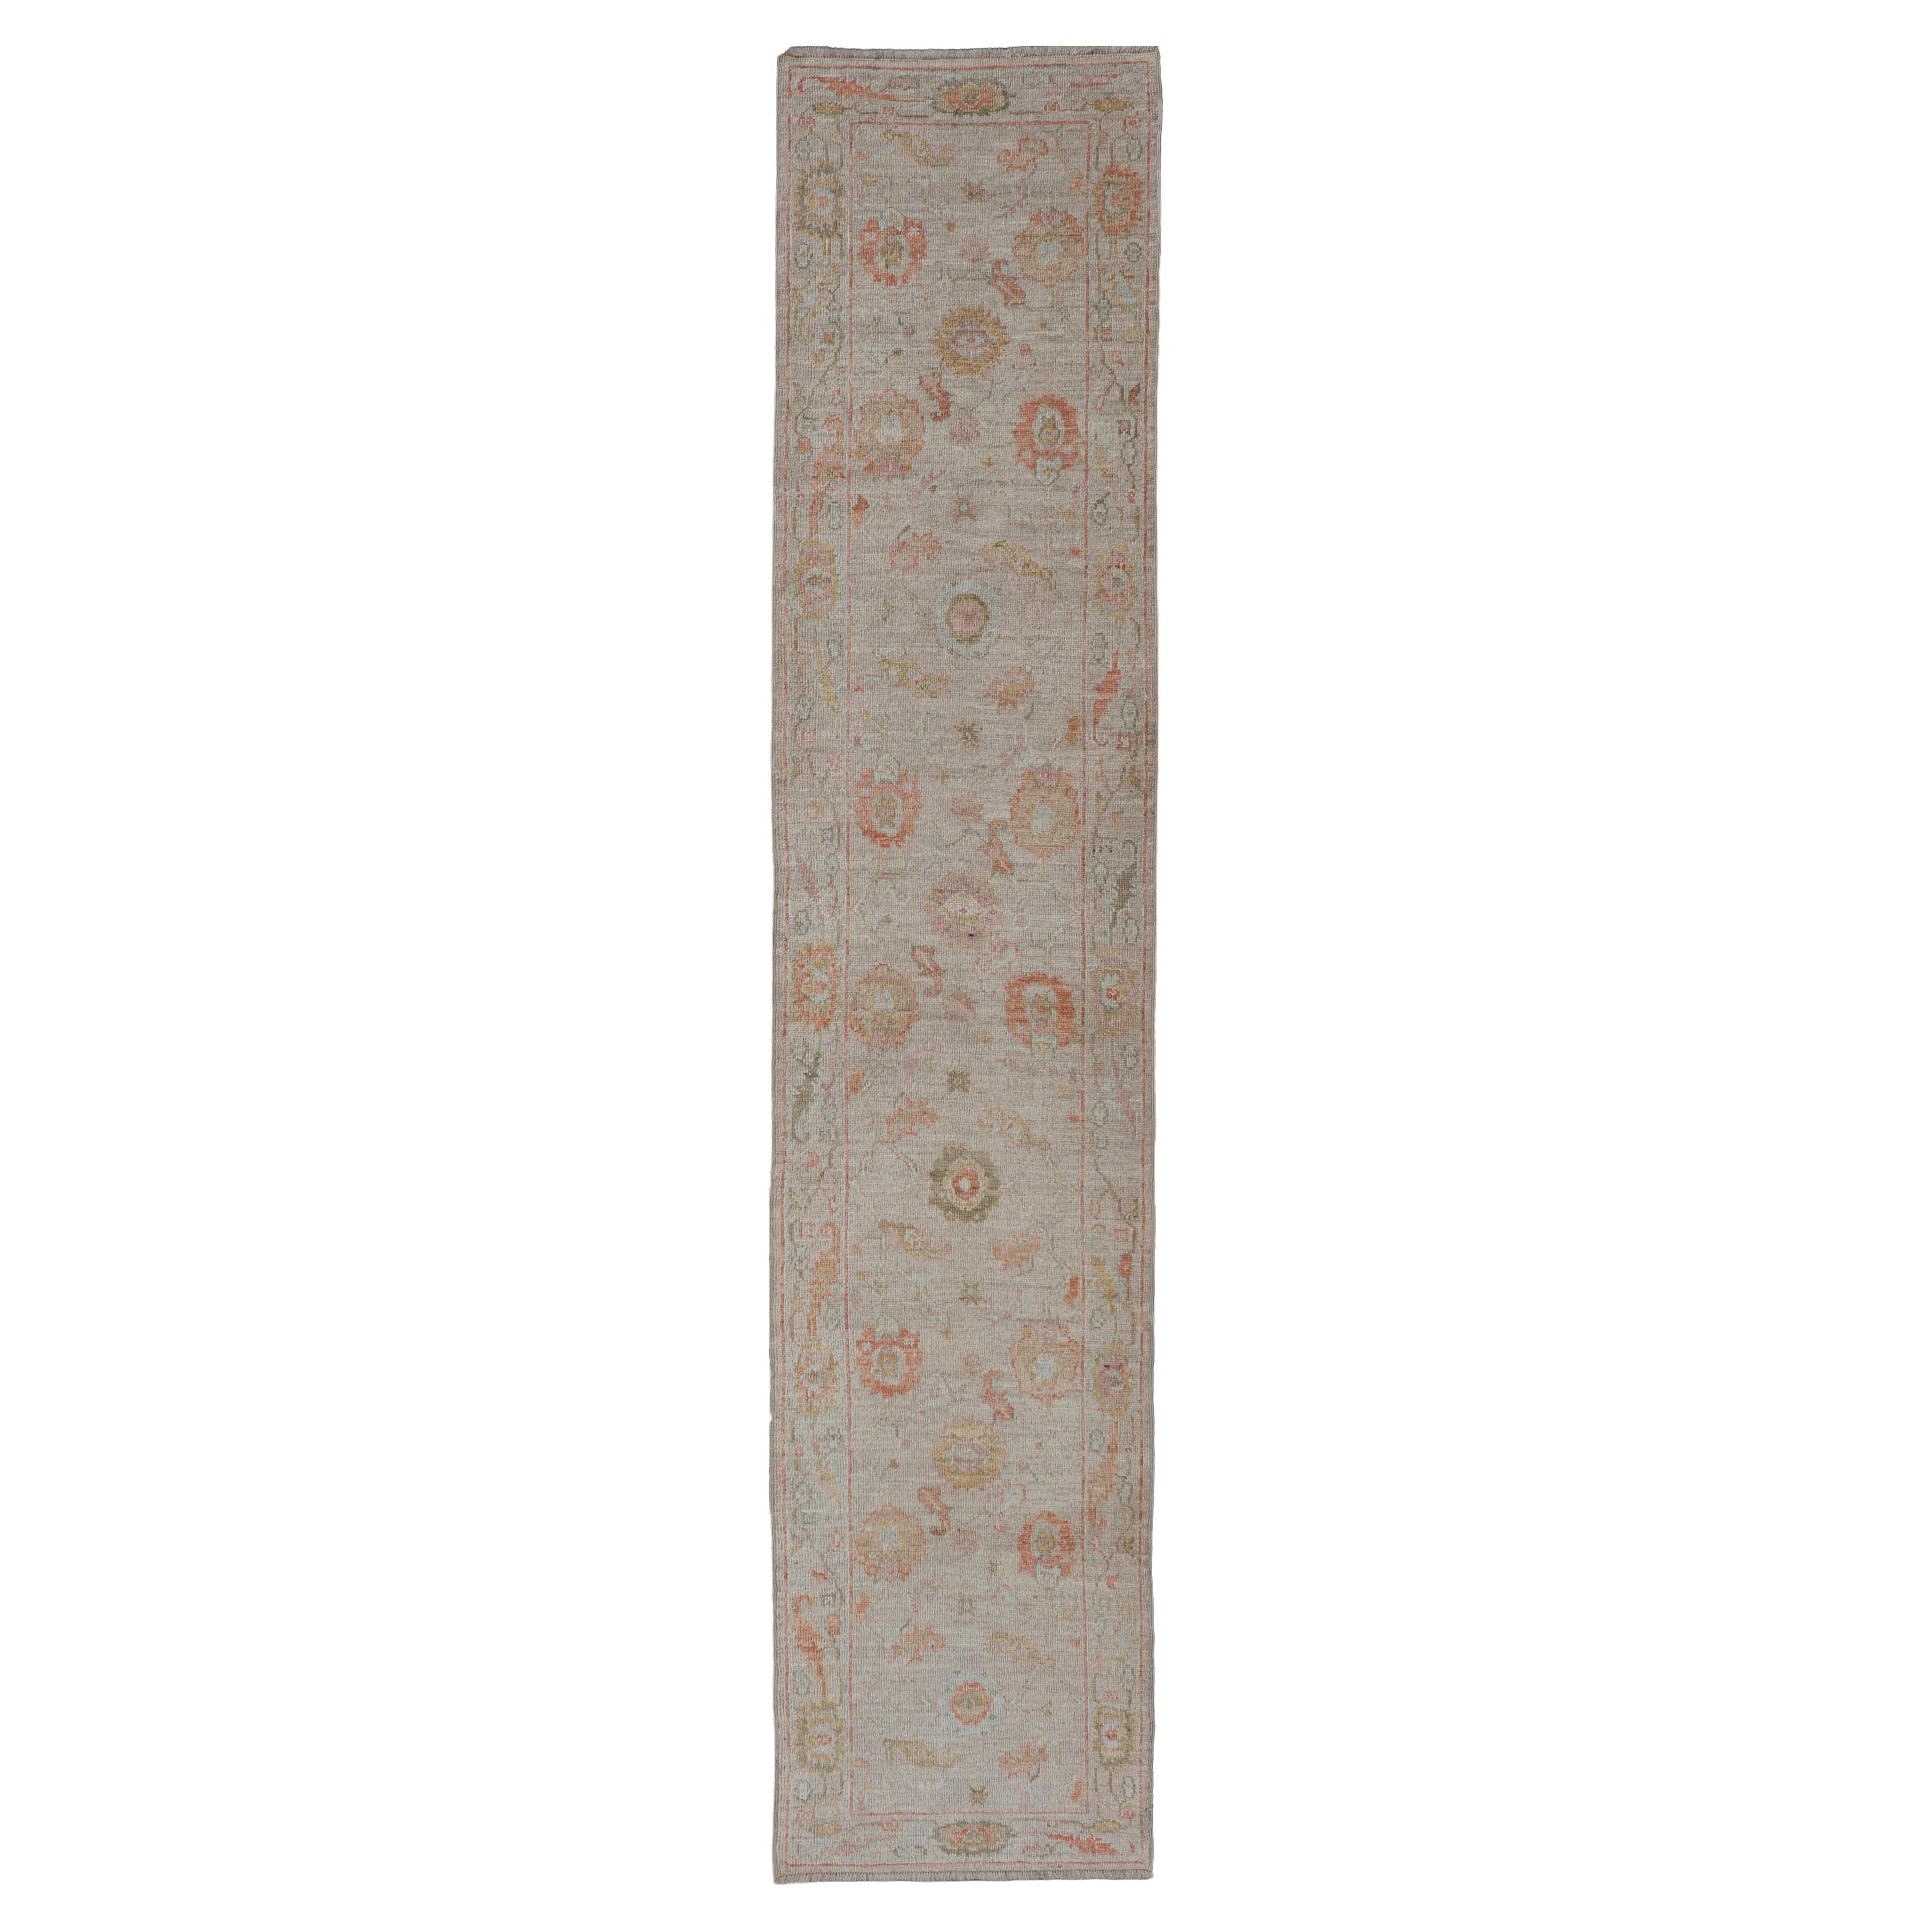 Angora Turkish Oushak Floral Runner in Cream with Pops of Orange, Green and Blue For Sale